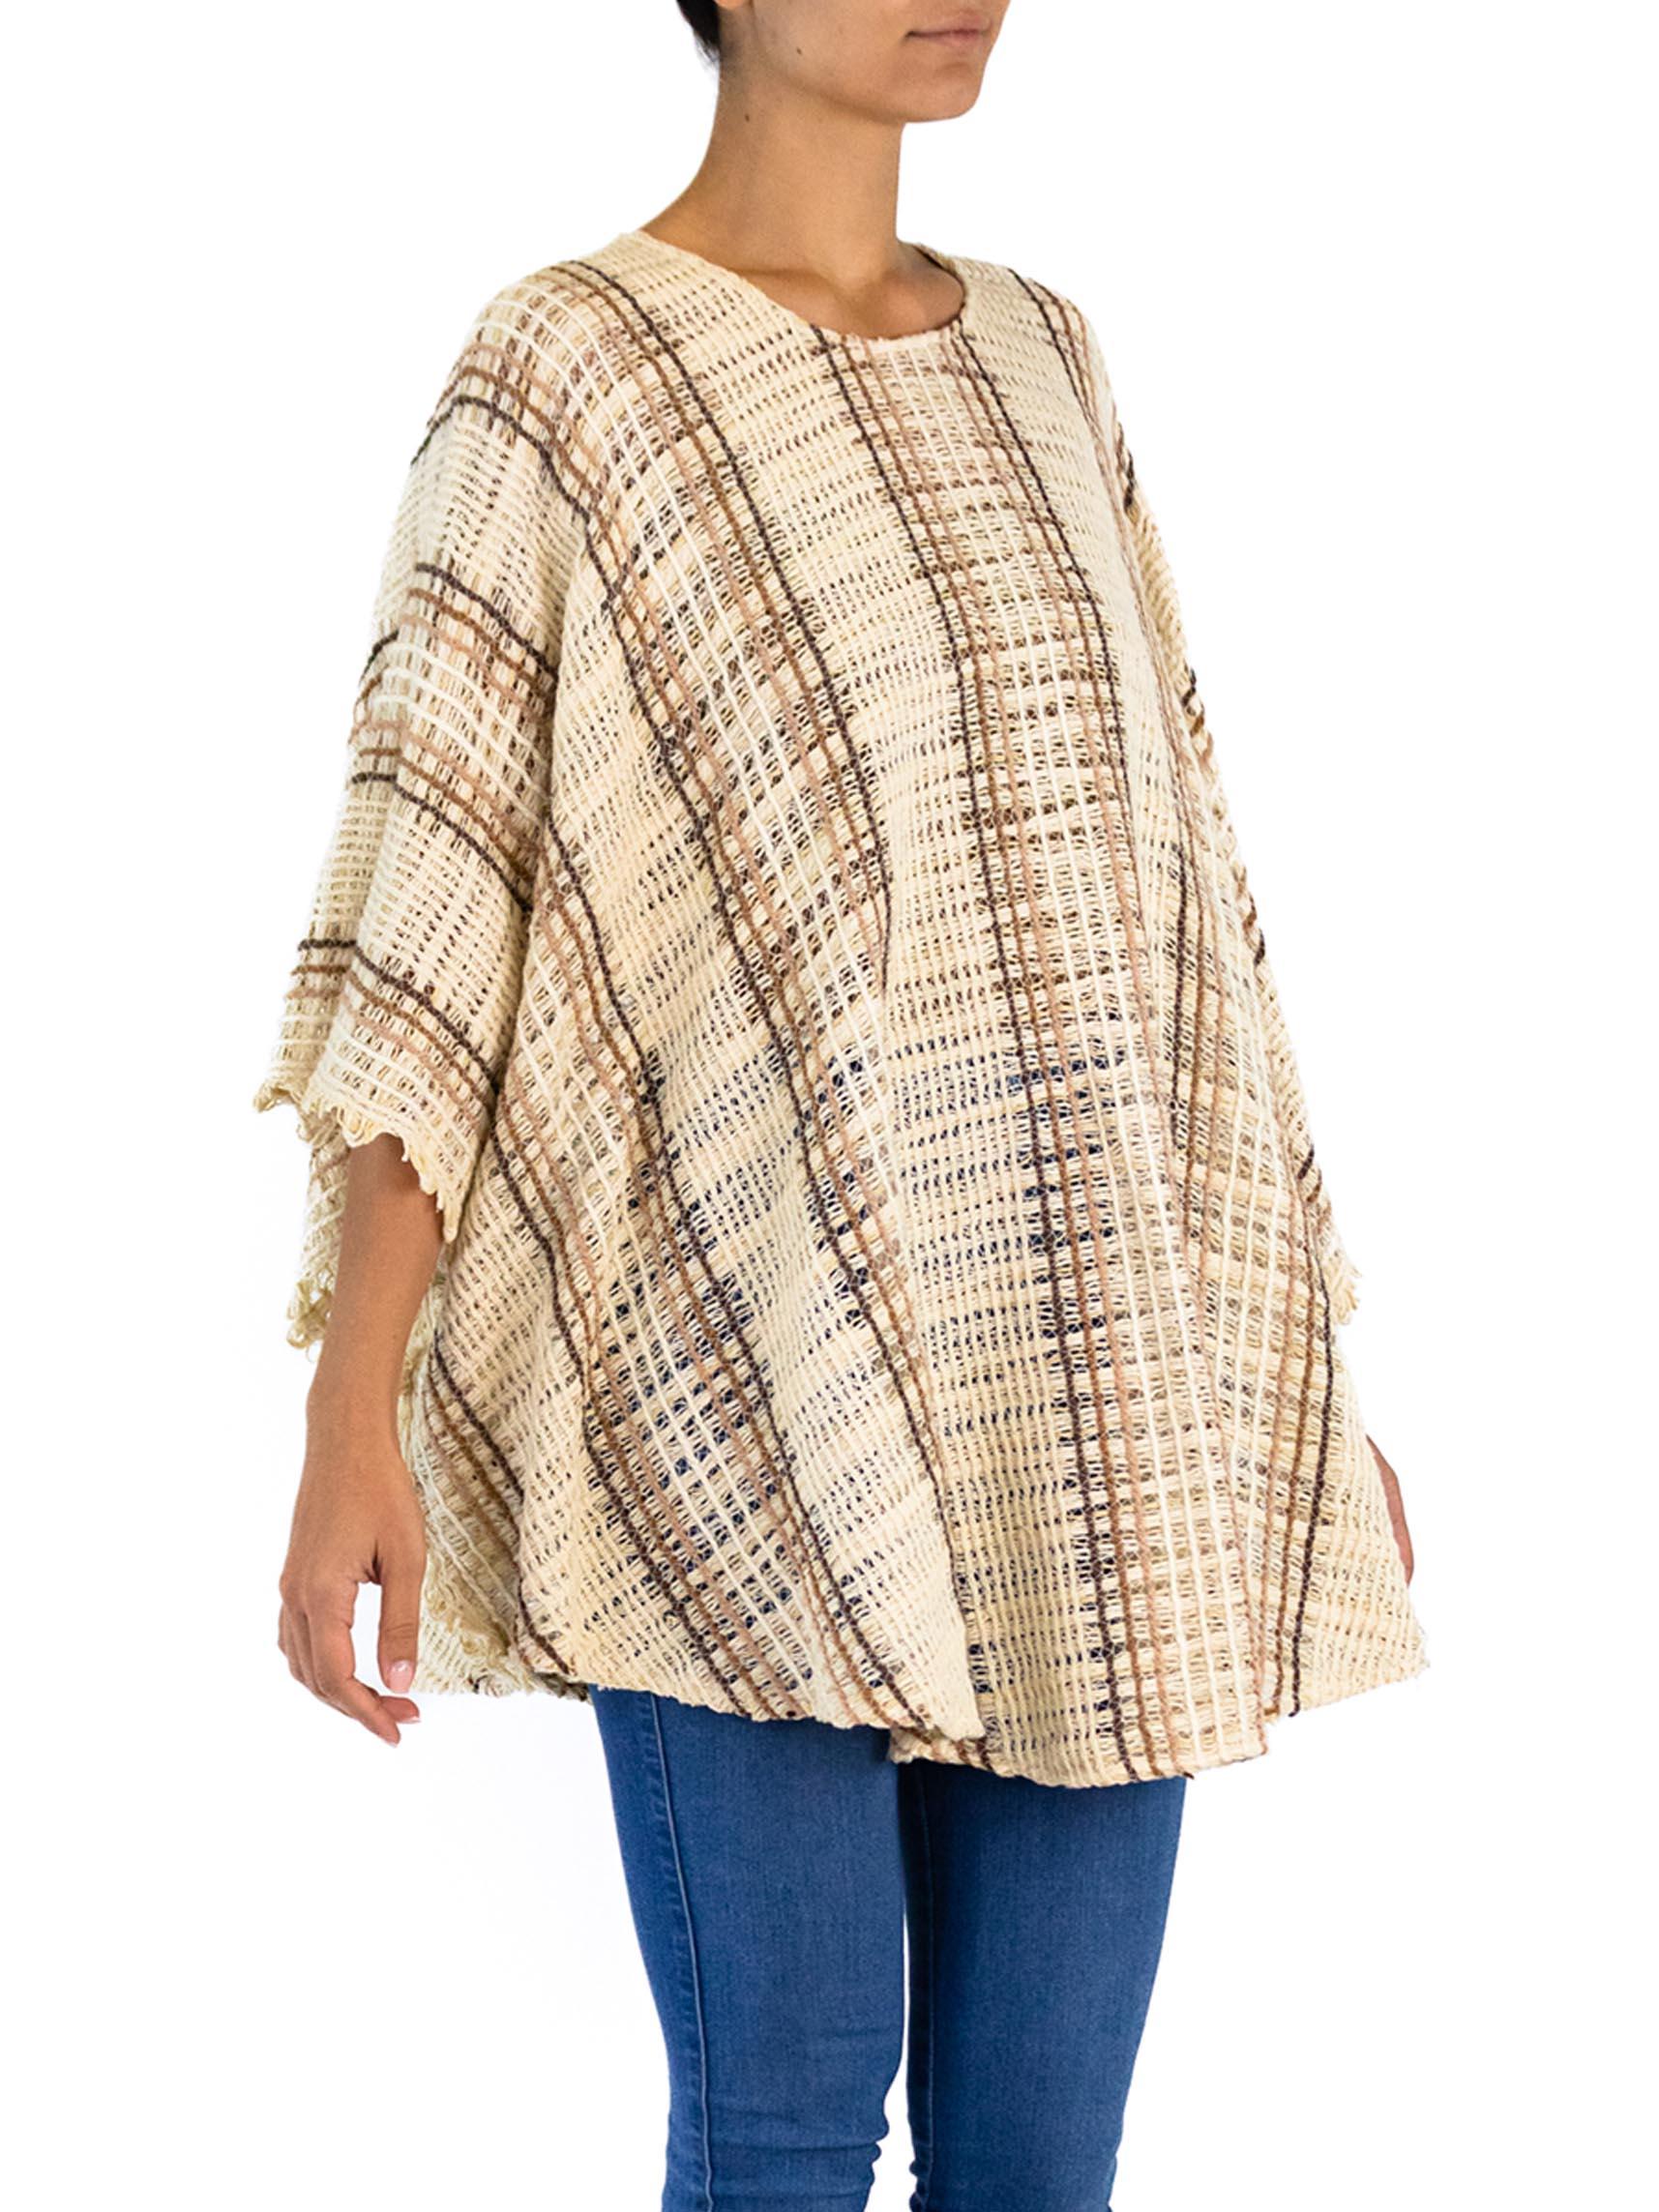 1970S Brown & Cream Cotton Blend Open Weave Tunic Top For Sale 3